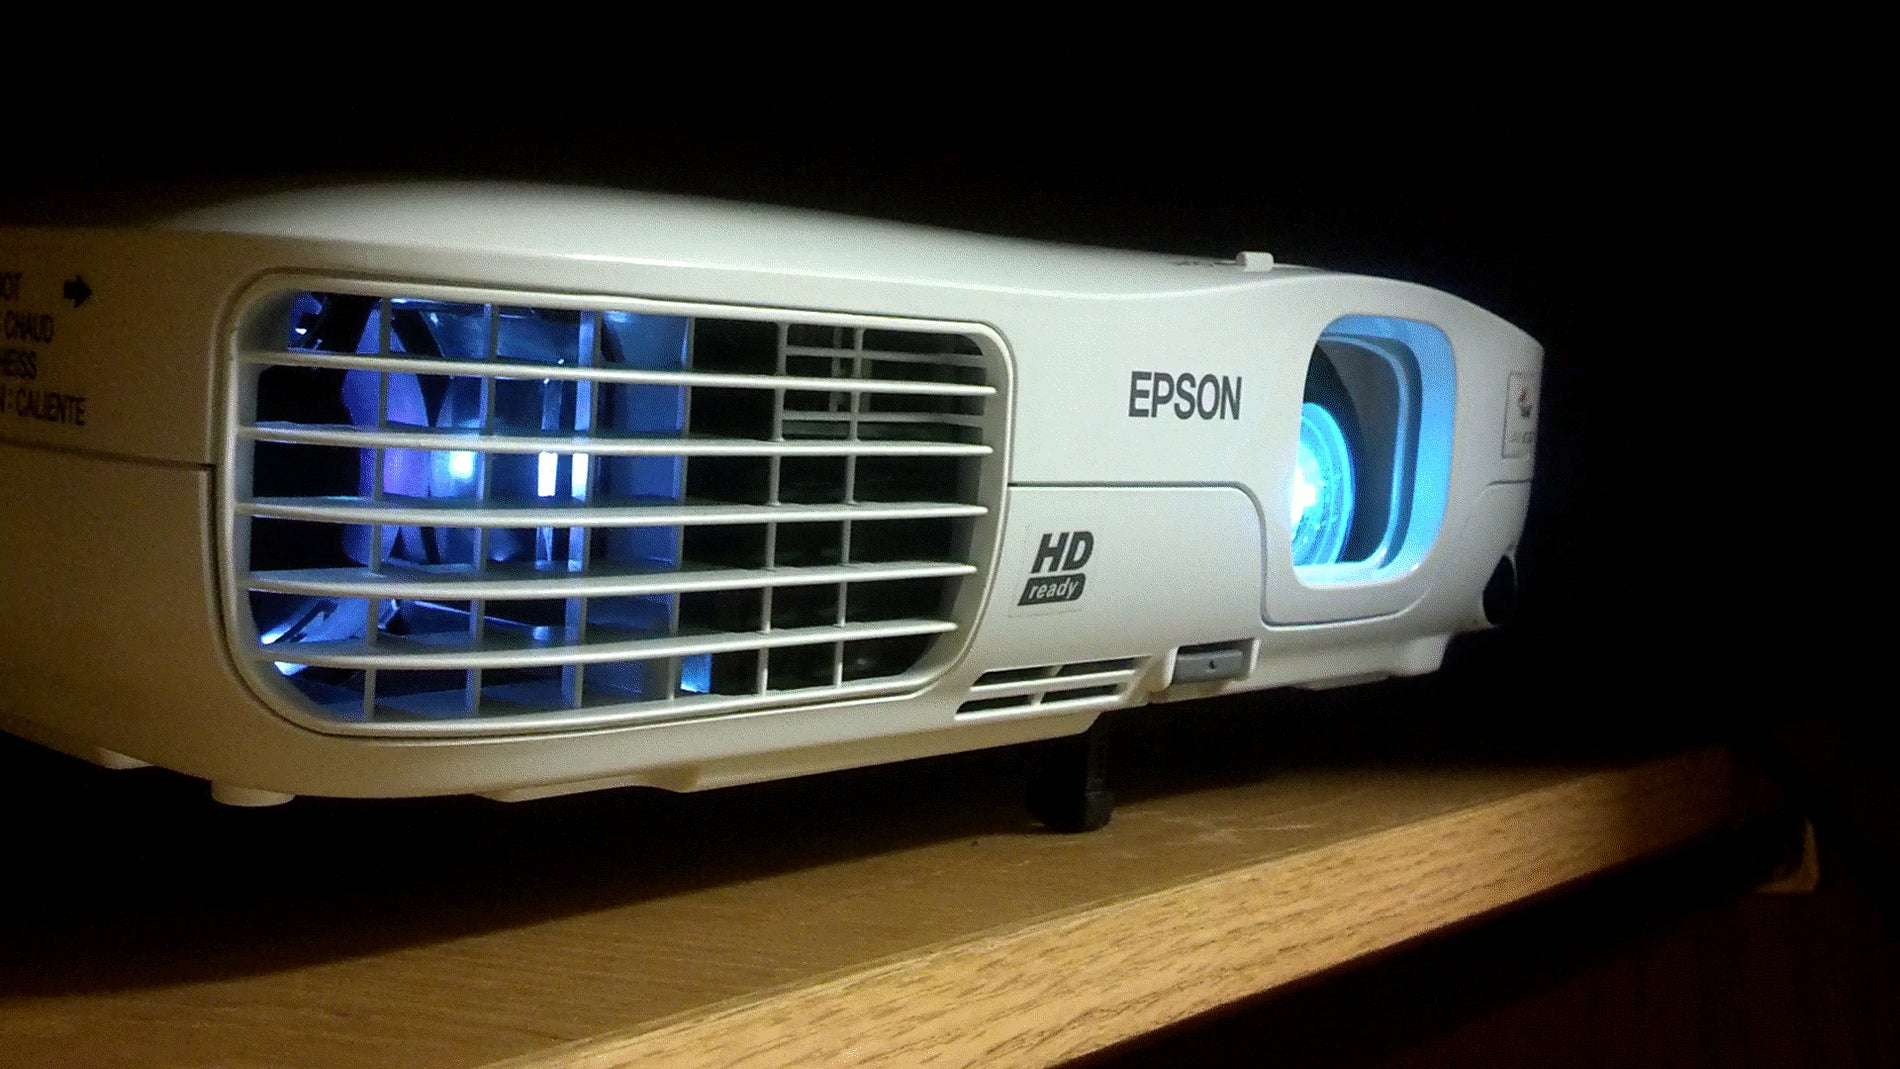 What's The Difference Between Standard, Short Throw and Ultra Short Throw Projectors?